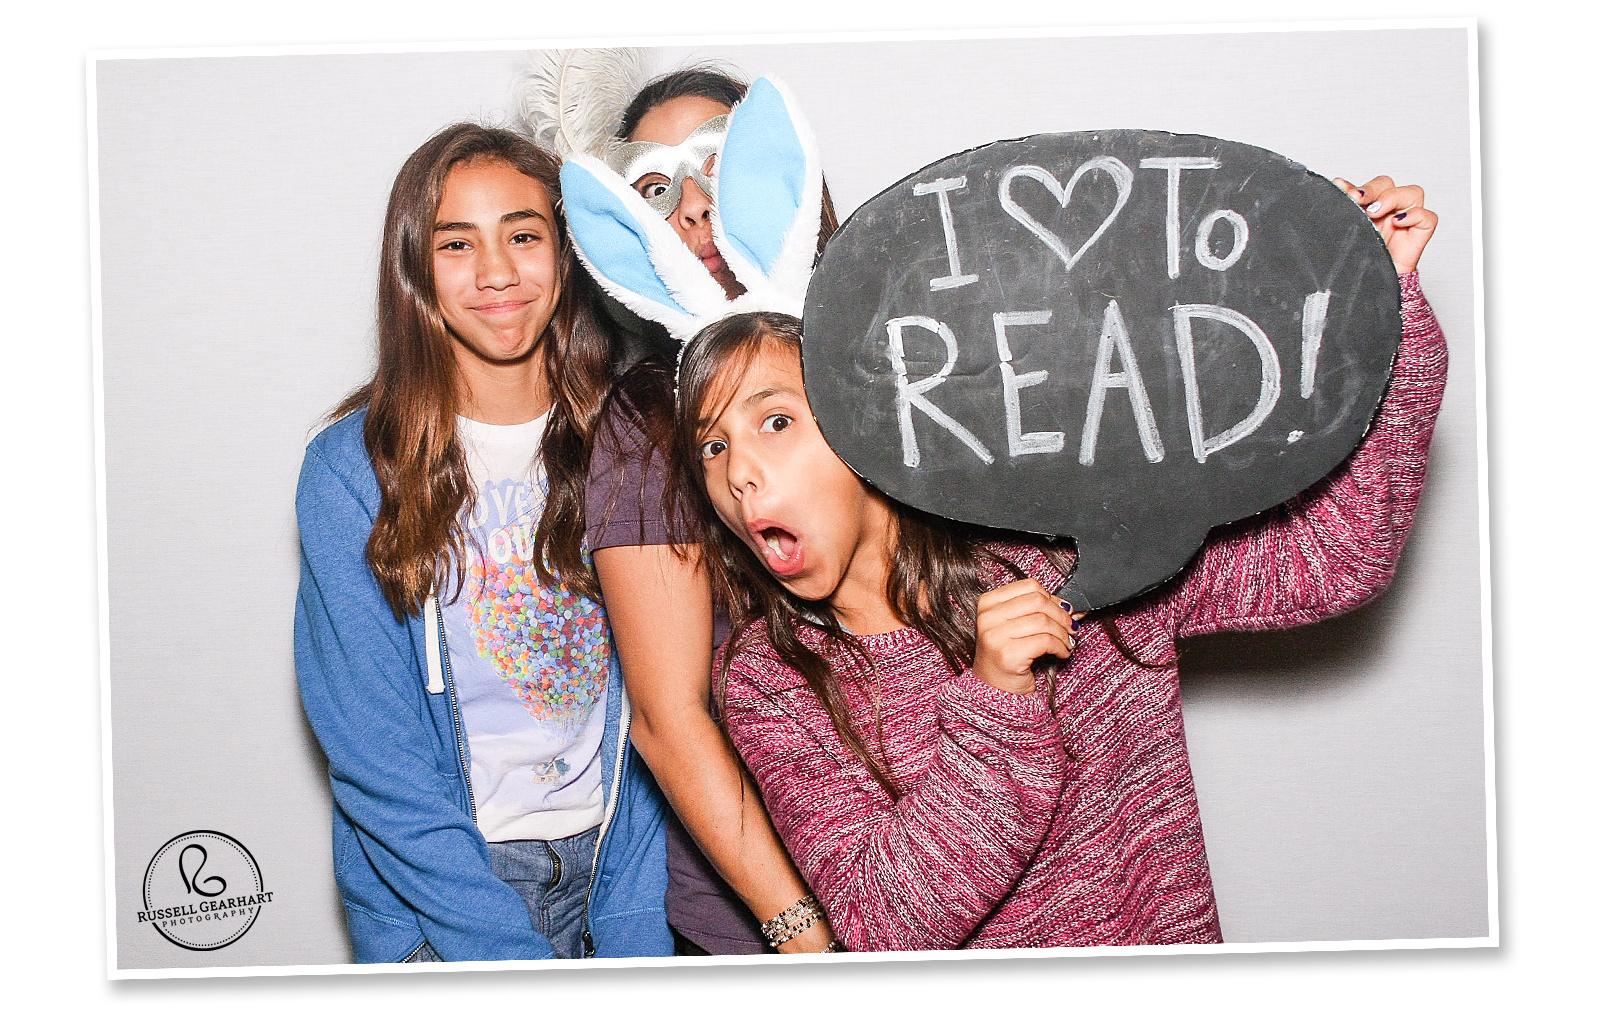 Pasadena Photobooth: El Deafo Book Event at Vroman’s Bookstore – Russell Gearhart Photography – www.gearhartphoto.com